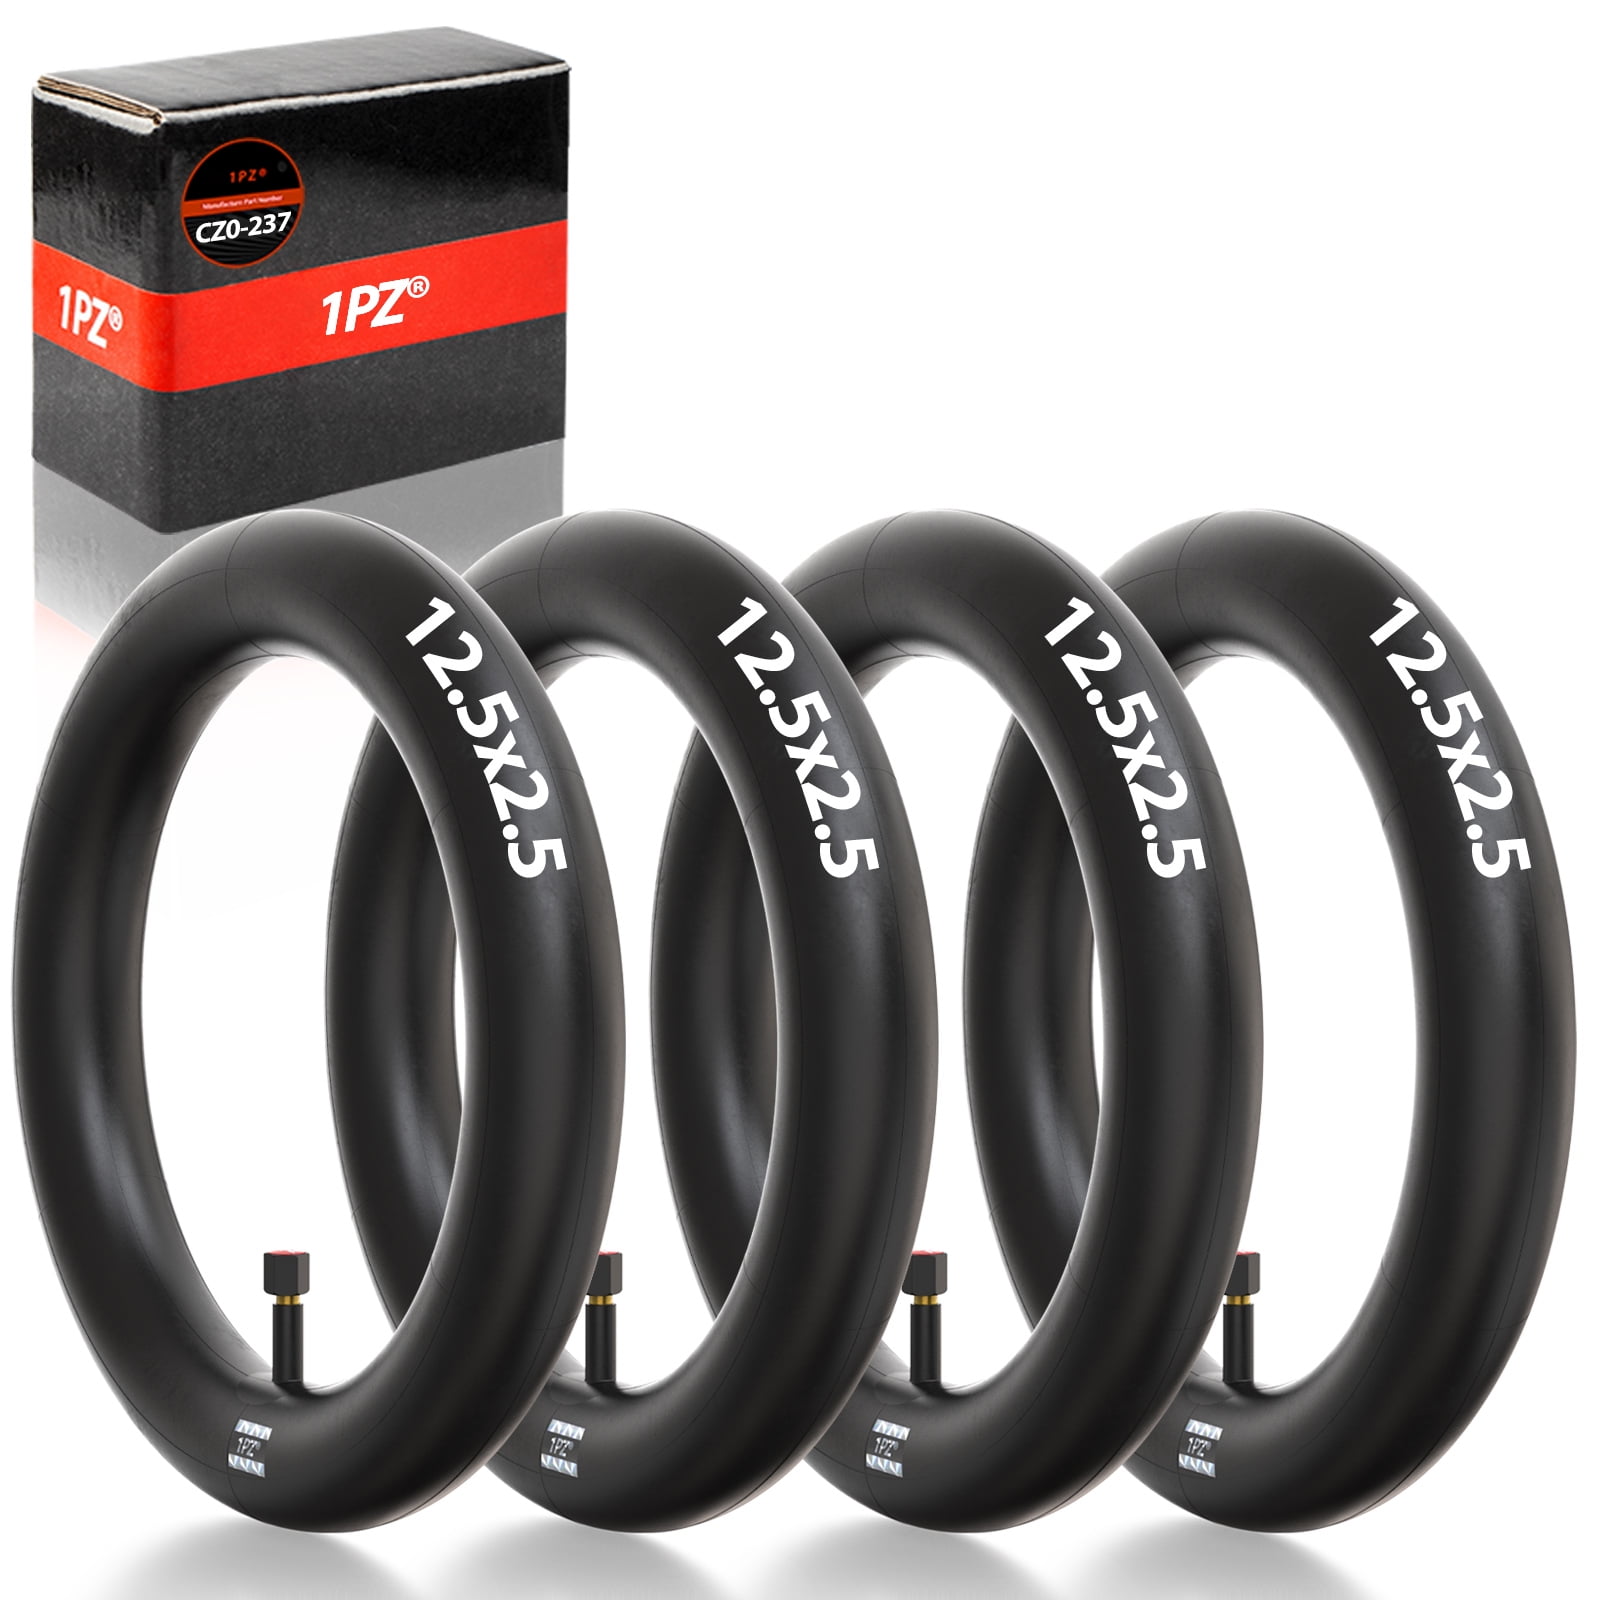 12 1/2 x2 1/4 Tire and Tube Set, 12.5x2.25 Dirt Bike Tire, 12.5 x 2.25  Inner Tube and Tire Compatible with Razor Pocket Mod Bella Betty Bistro  Daisy